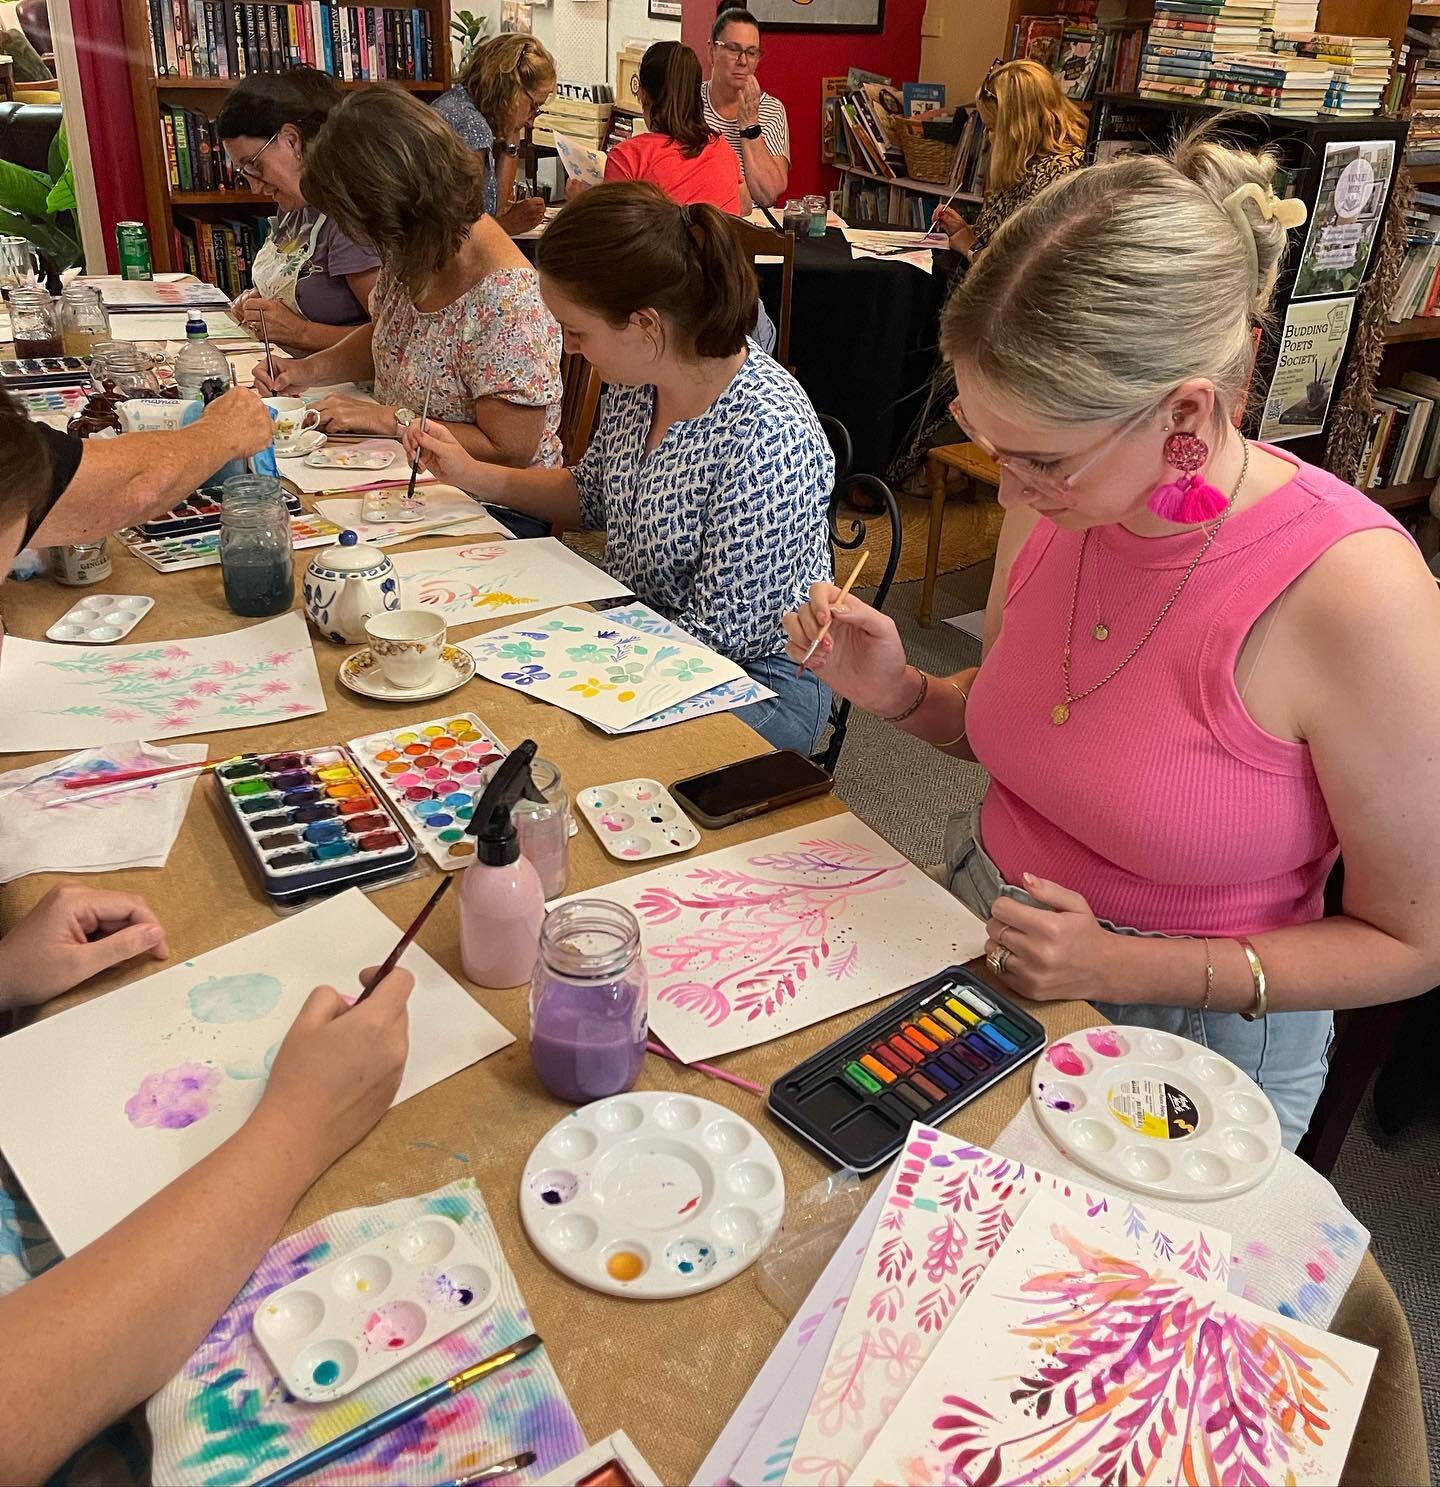 Thanks for a great afternoon ladies! The wonderful tunja keep us all hydrated and feed as we painted all afternoon @thebookboutiquebb #workshop #watercolourflowers #floralart #intuitiveart #comepaintwithme